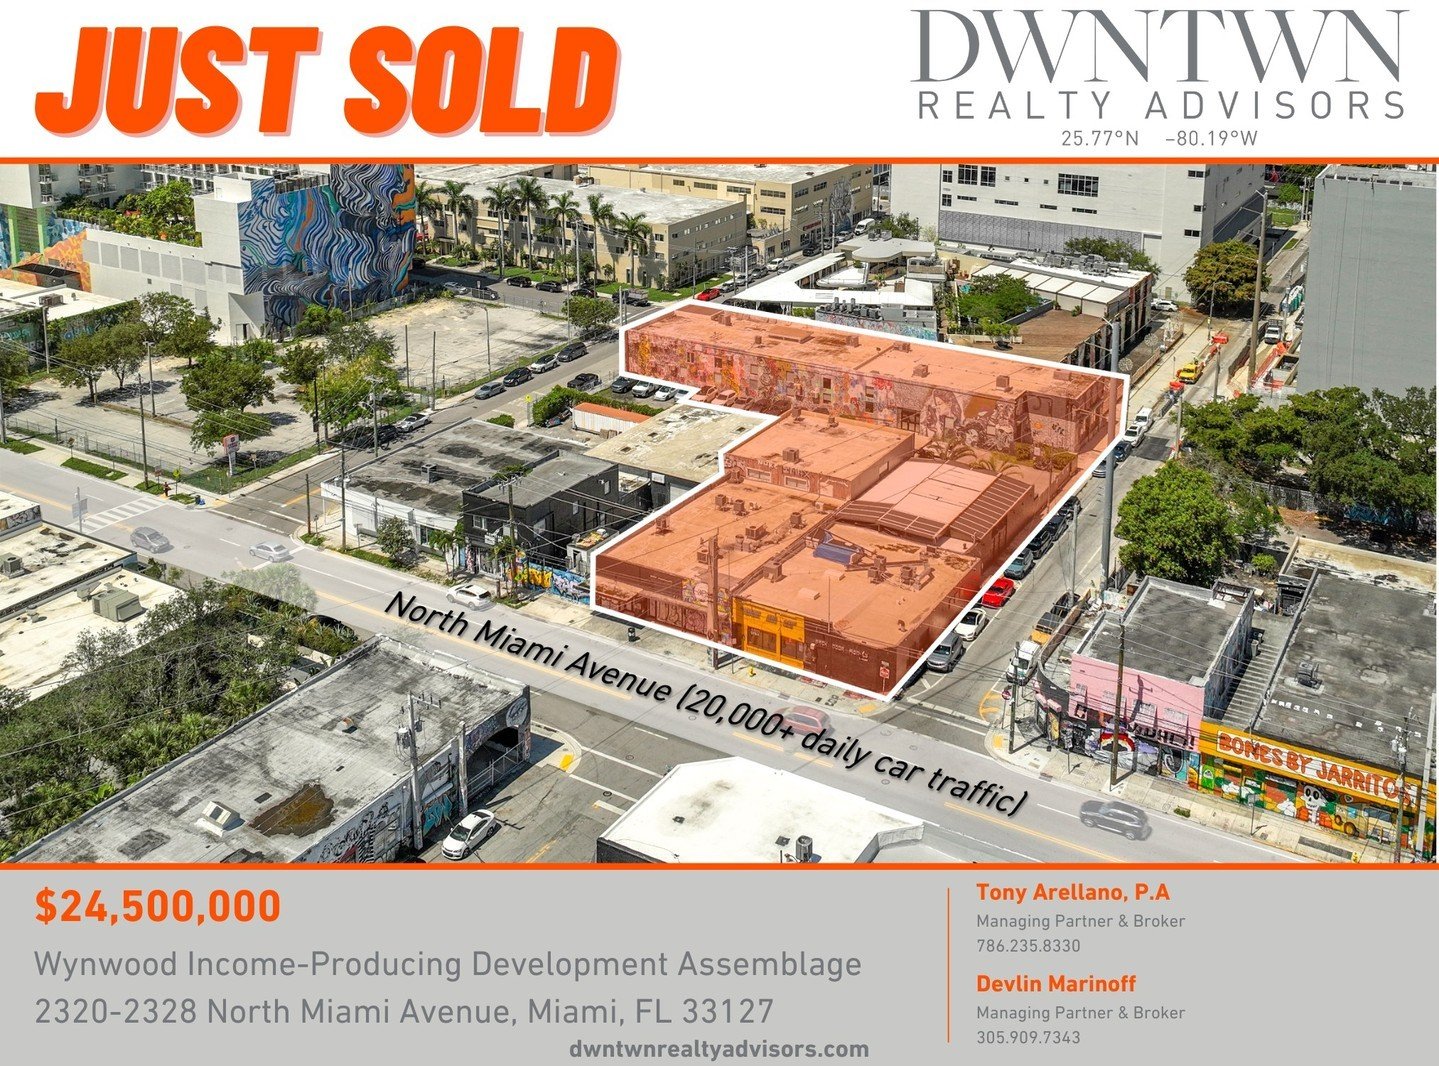 JUST SOLD FOR $24,500,000 | Wynwood Retail Portfolio

DWNTWN Realty Advisors, a leading commercial real estate brokerage based in Miami, is proud to announce the successful completion of the $24.5 million sale of a prominent retail building in the he